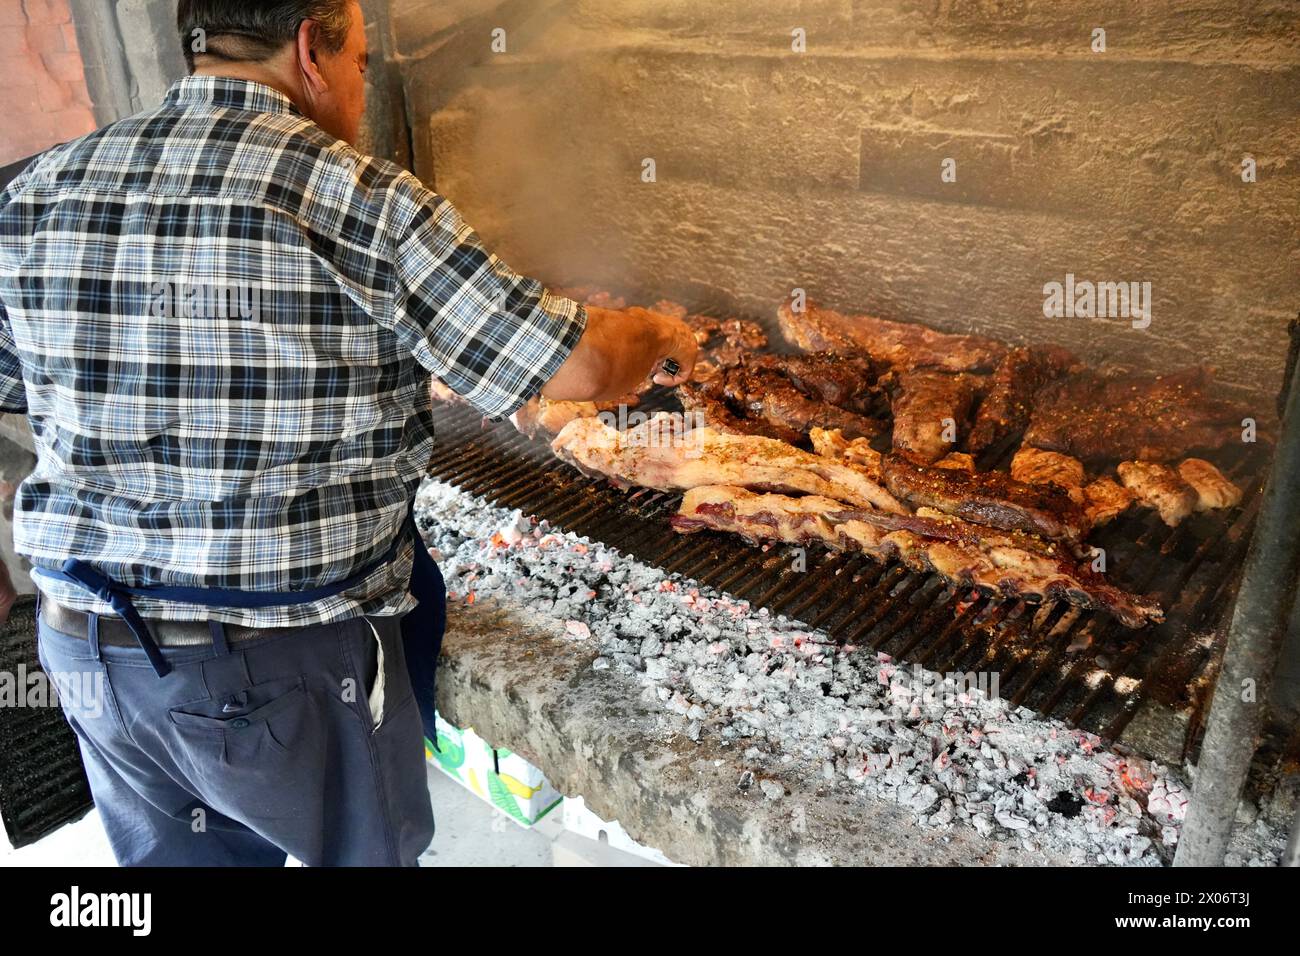 A man cooking over a bbq grill heated by hot coals. Stock Photo